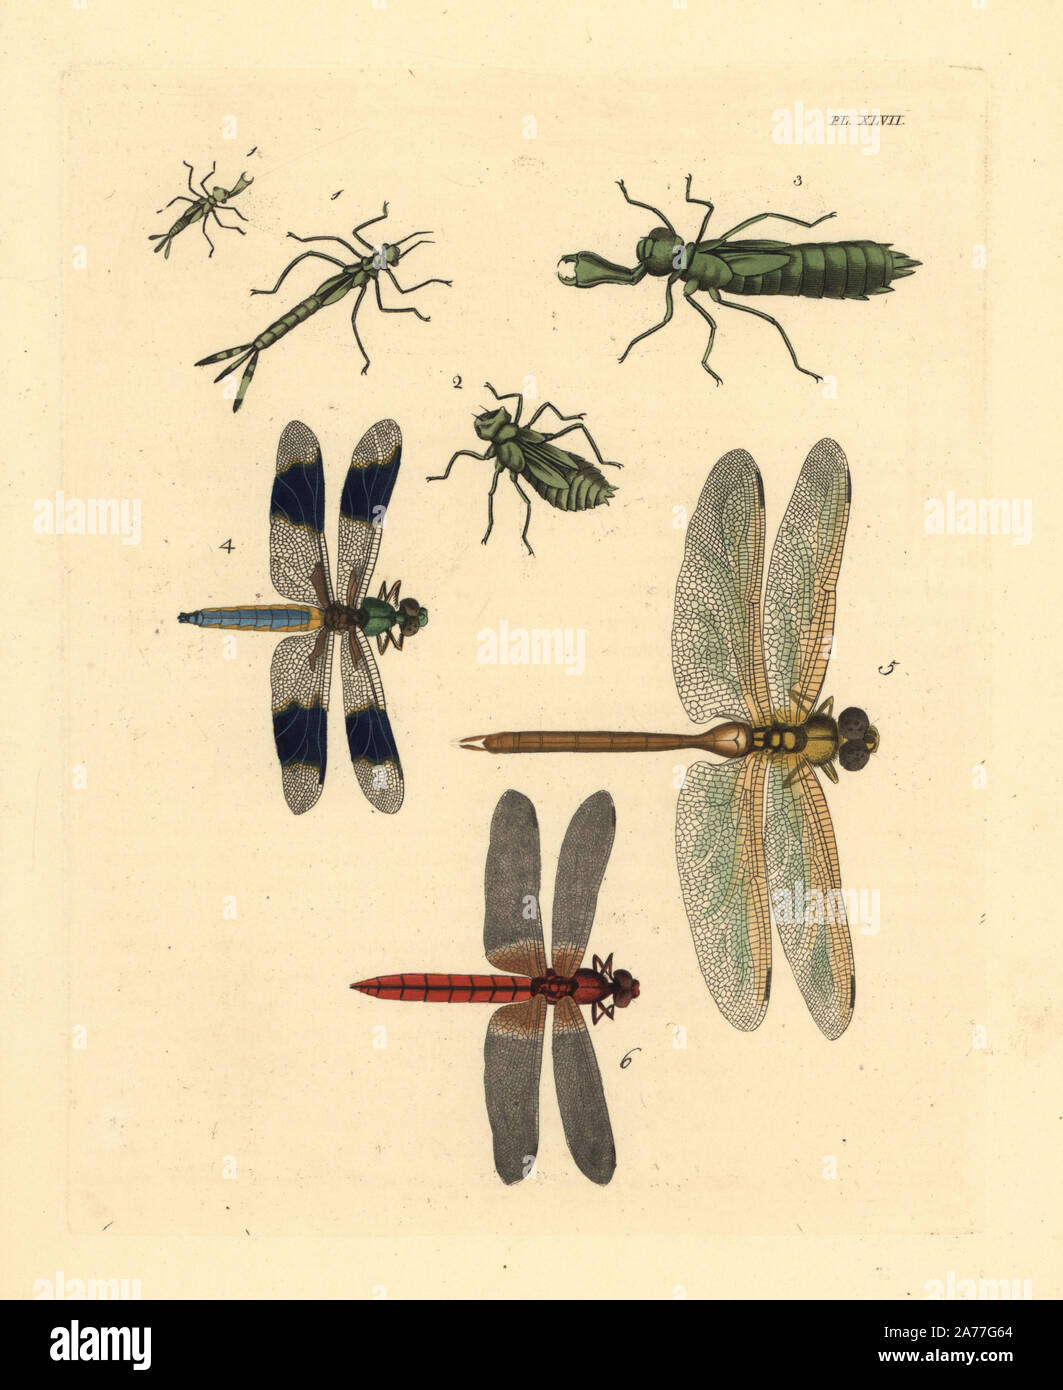 Dragonfly larval forms 1,2,3, common whitetail dragonfly, Libellula lydia 4, green darner, Anax junius 5, and scarlet skimmer or crimson darter, Crocothemis servilia 6. Handcoloured lithograph from John O. Westwood's new edition of Dru Drury's 'Illustrations of Exotic Entomology,' Bohn, London, 1837. Stock Photo